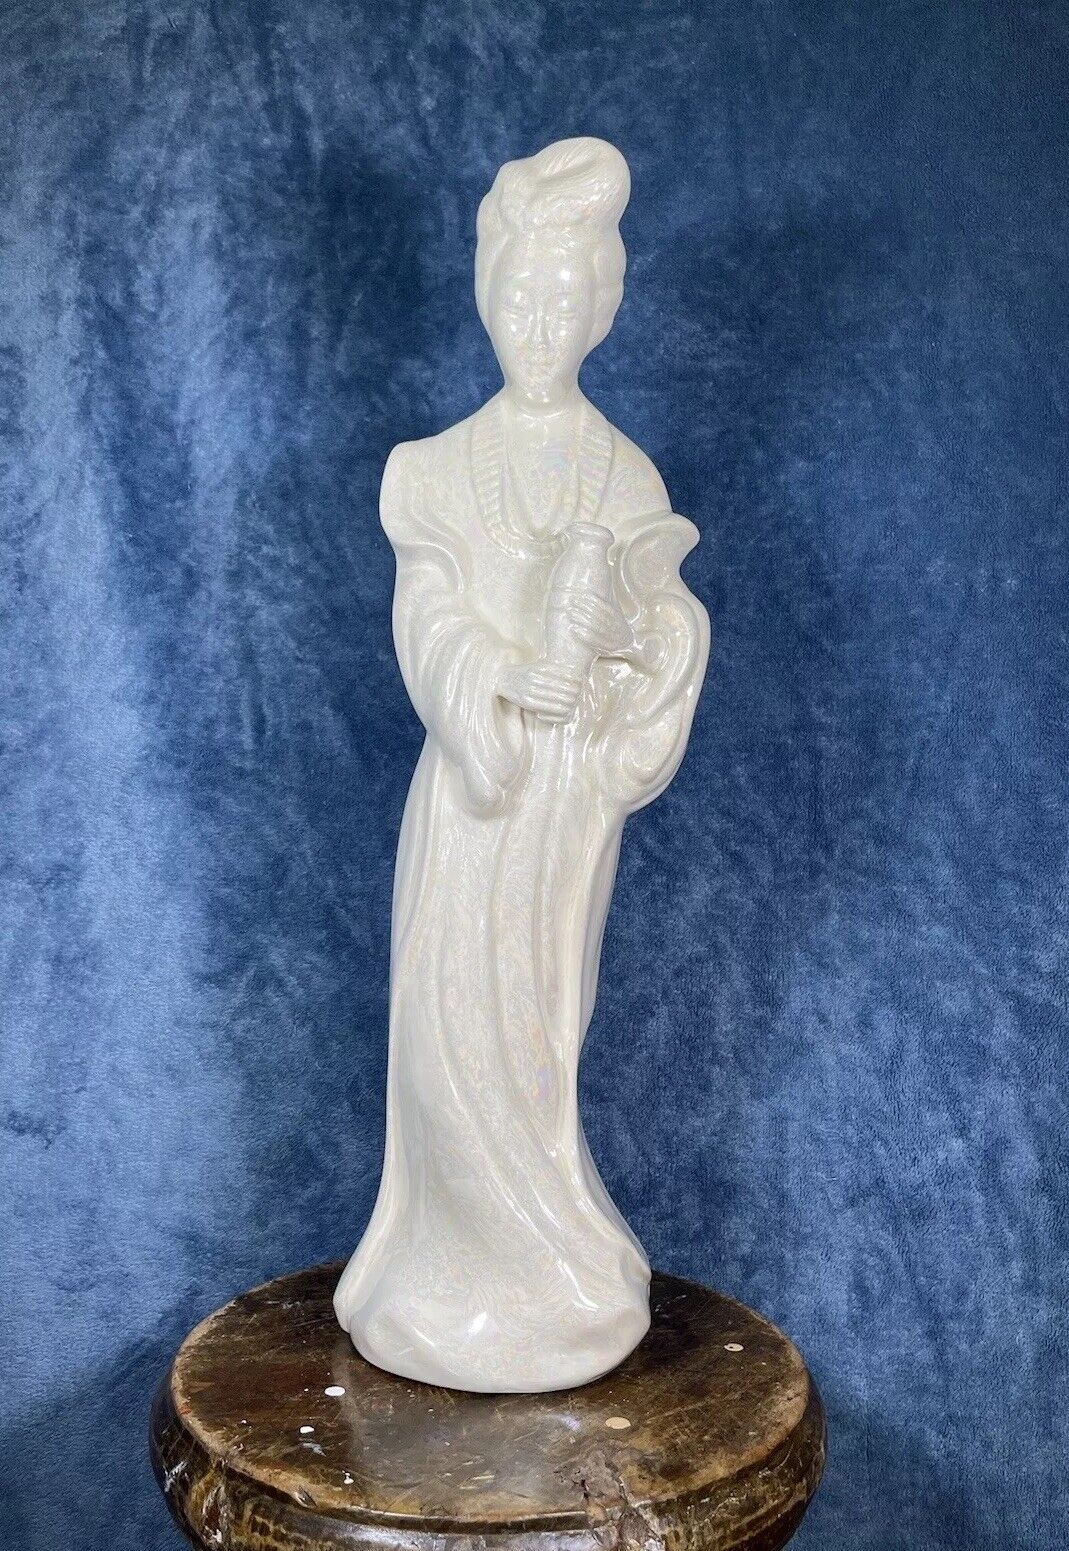 Vintage Pearlized Chinoiserie Chinese Woman Figurine Grand Millennial Statue